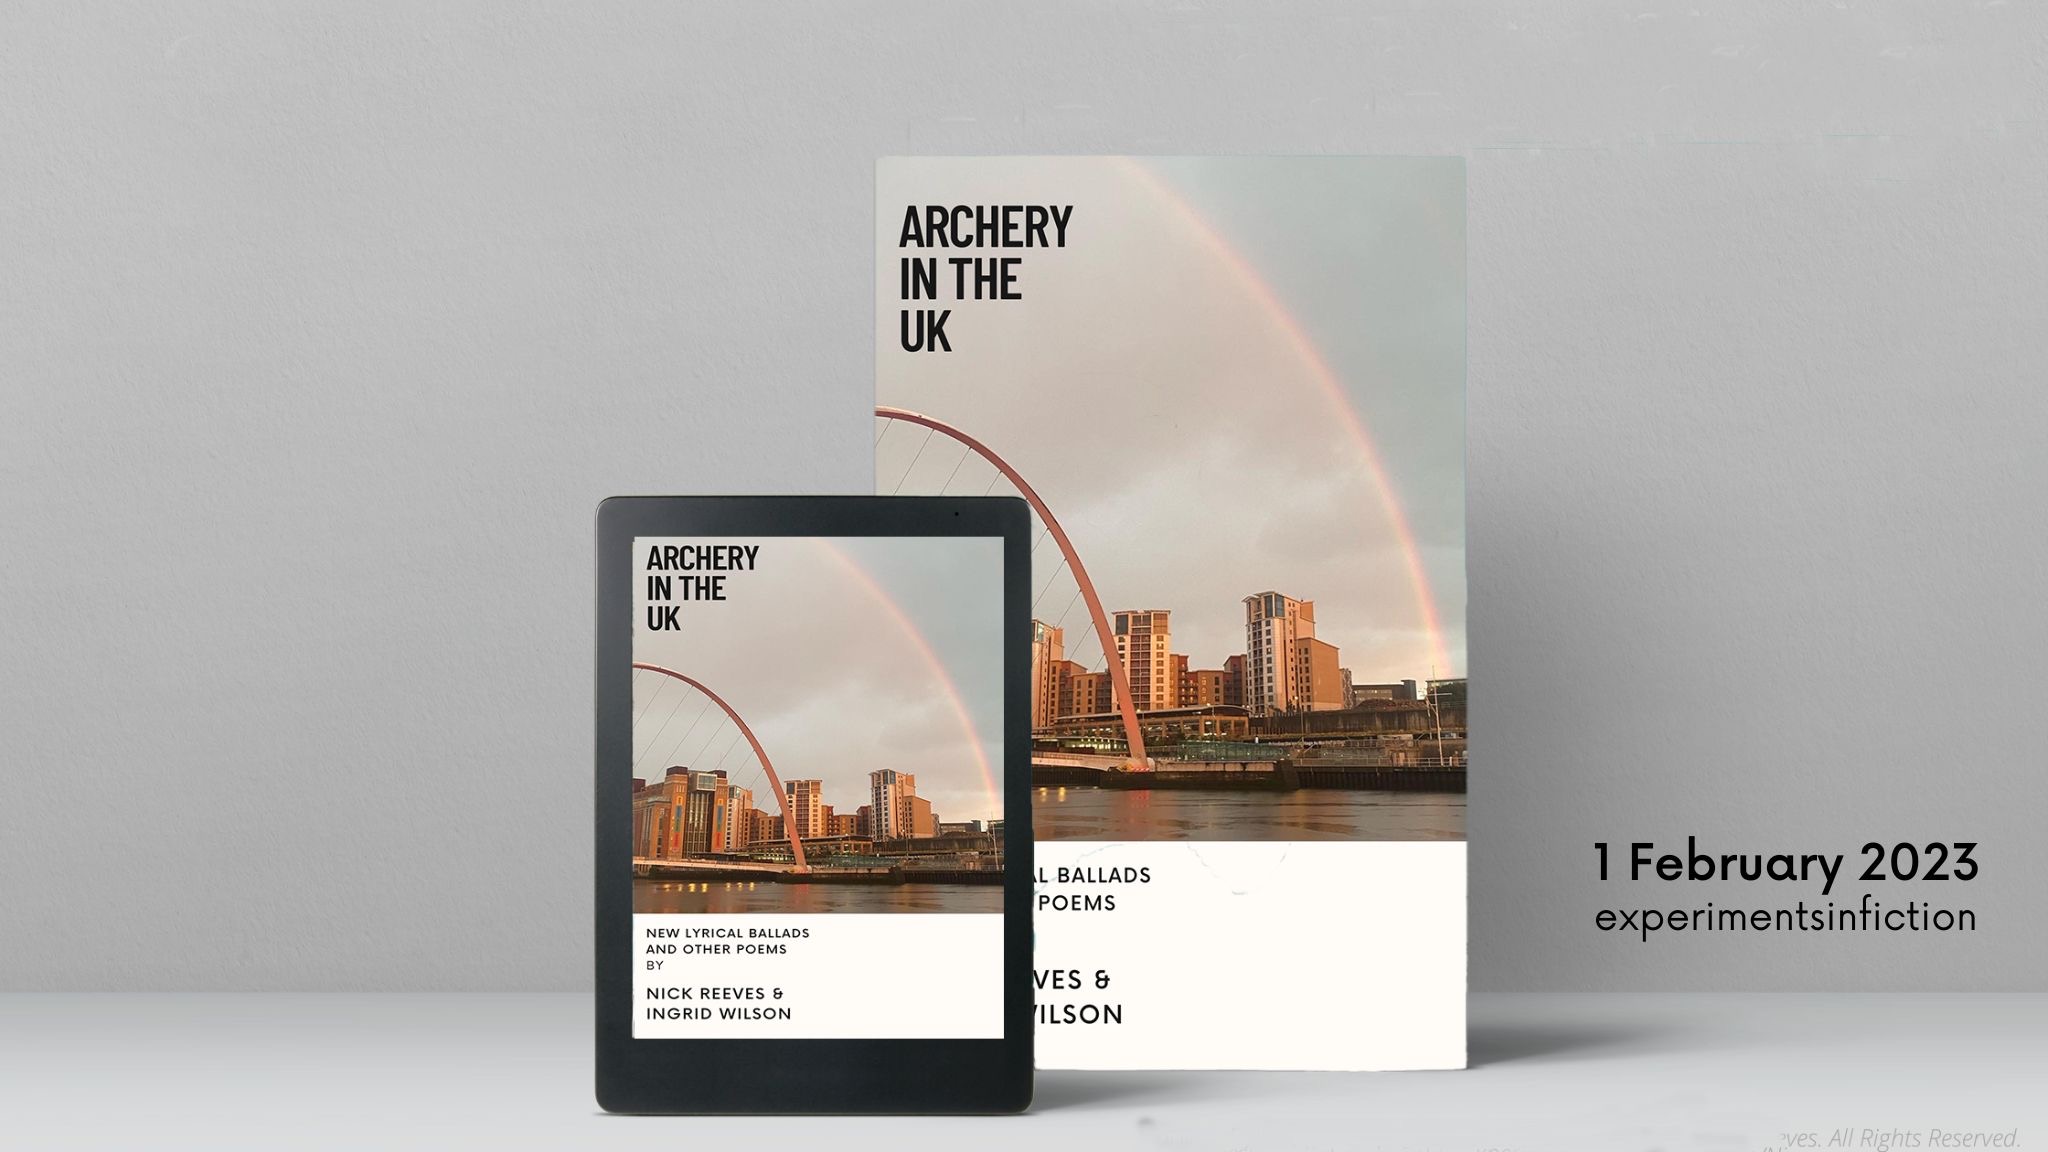 “Archery in the UK” by Nick Reeves and Ingrid Wilson: A Review by Barbara Leonhard